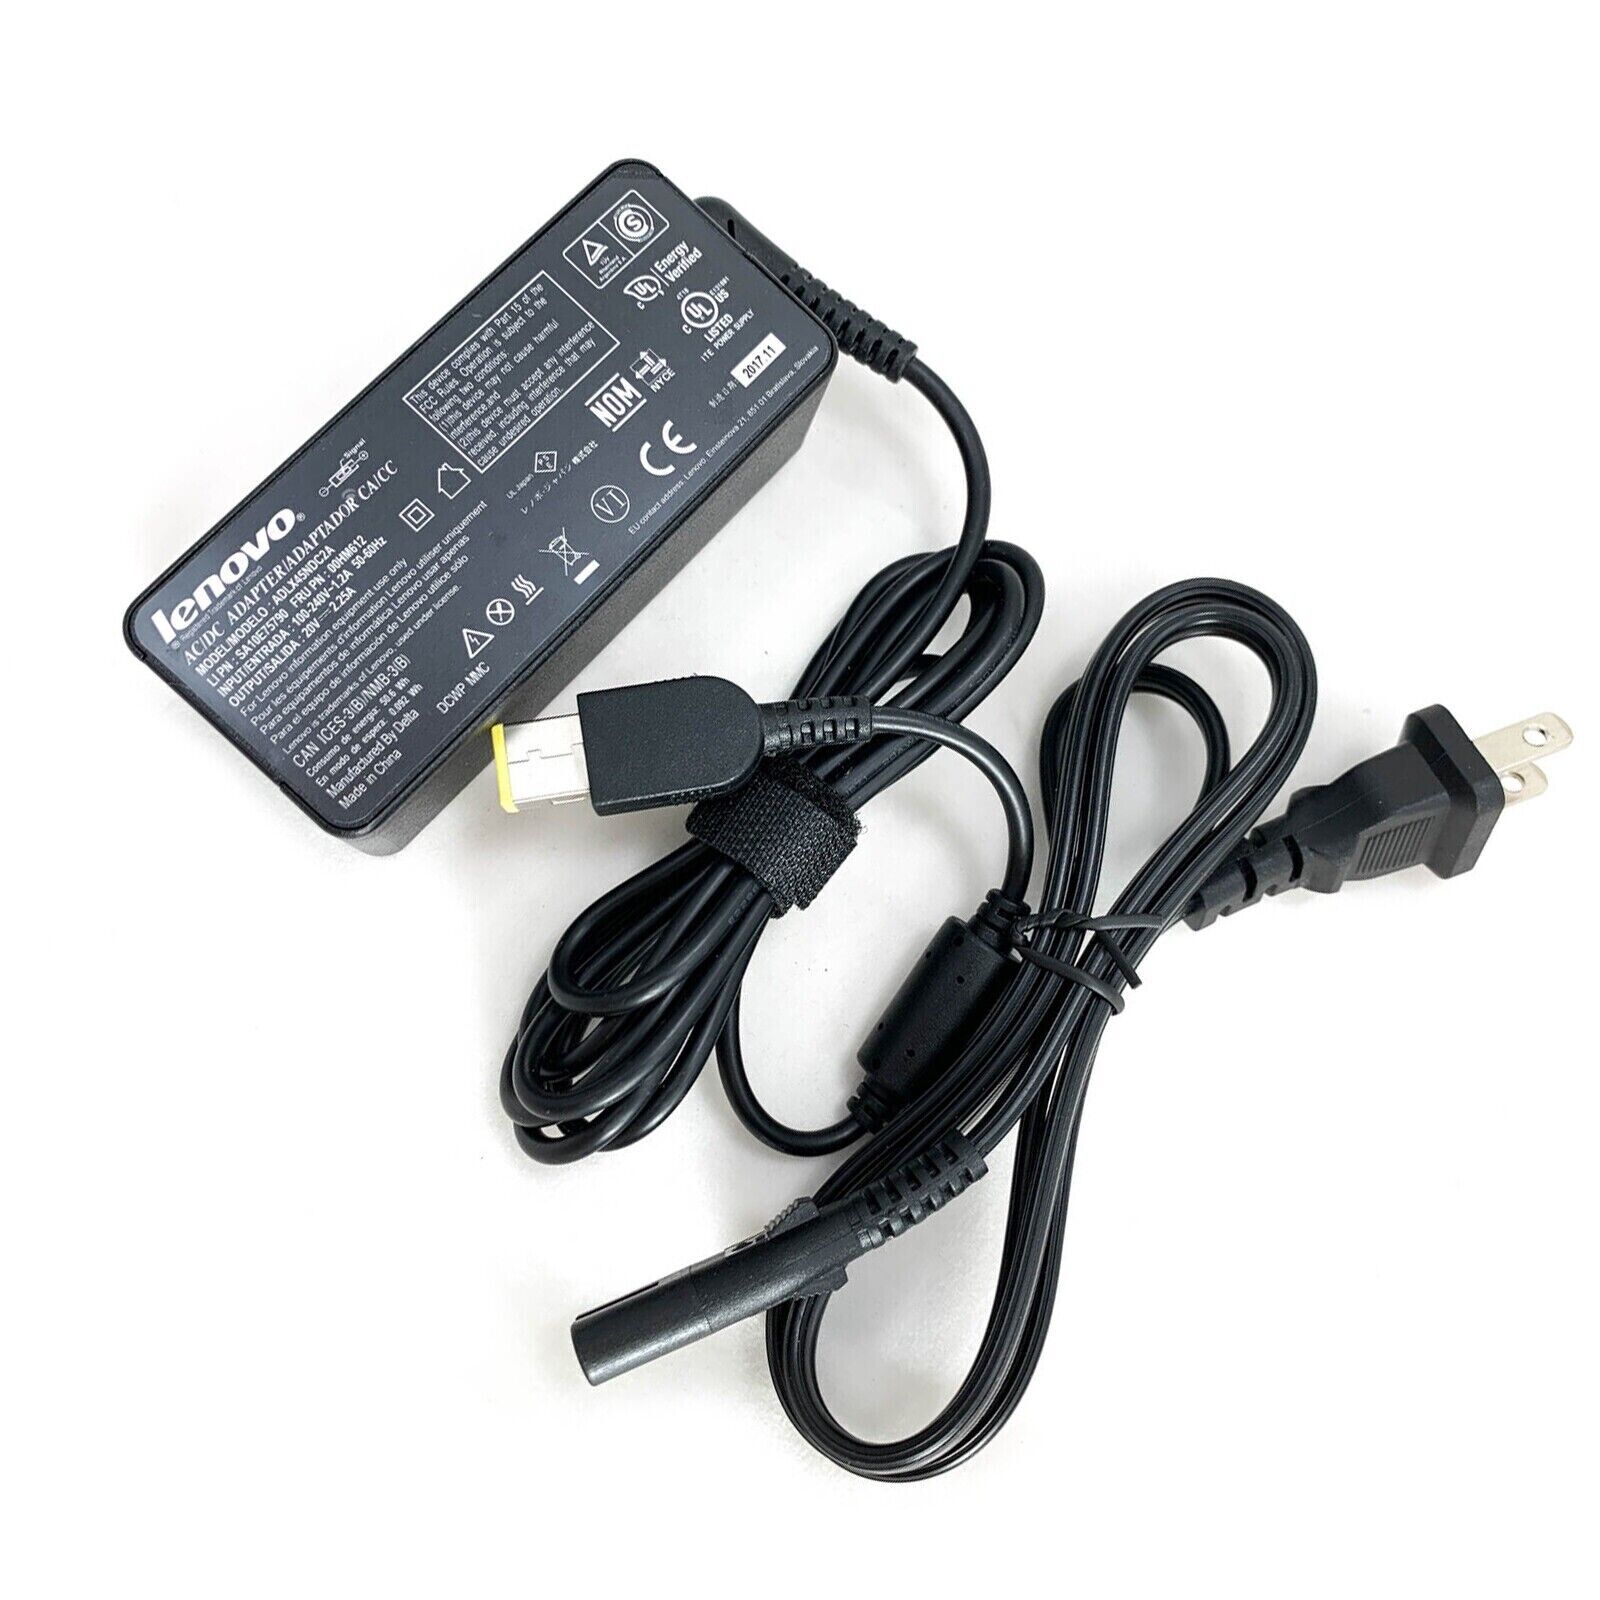 Genuine Lenovo 00HM615 AC/DC Power Supply Adapter 20V 2.25A 45W OEM Charger